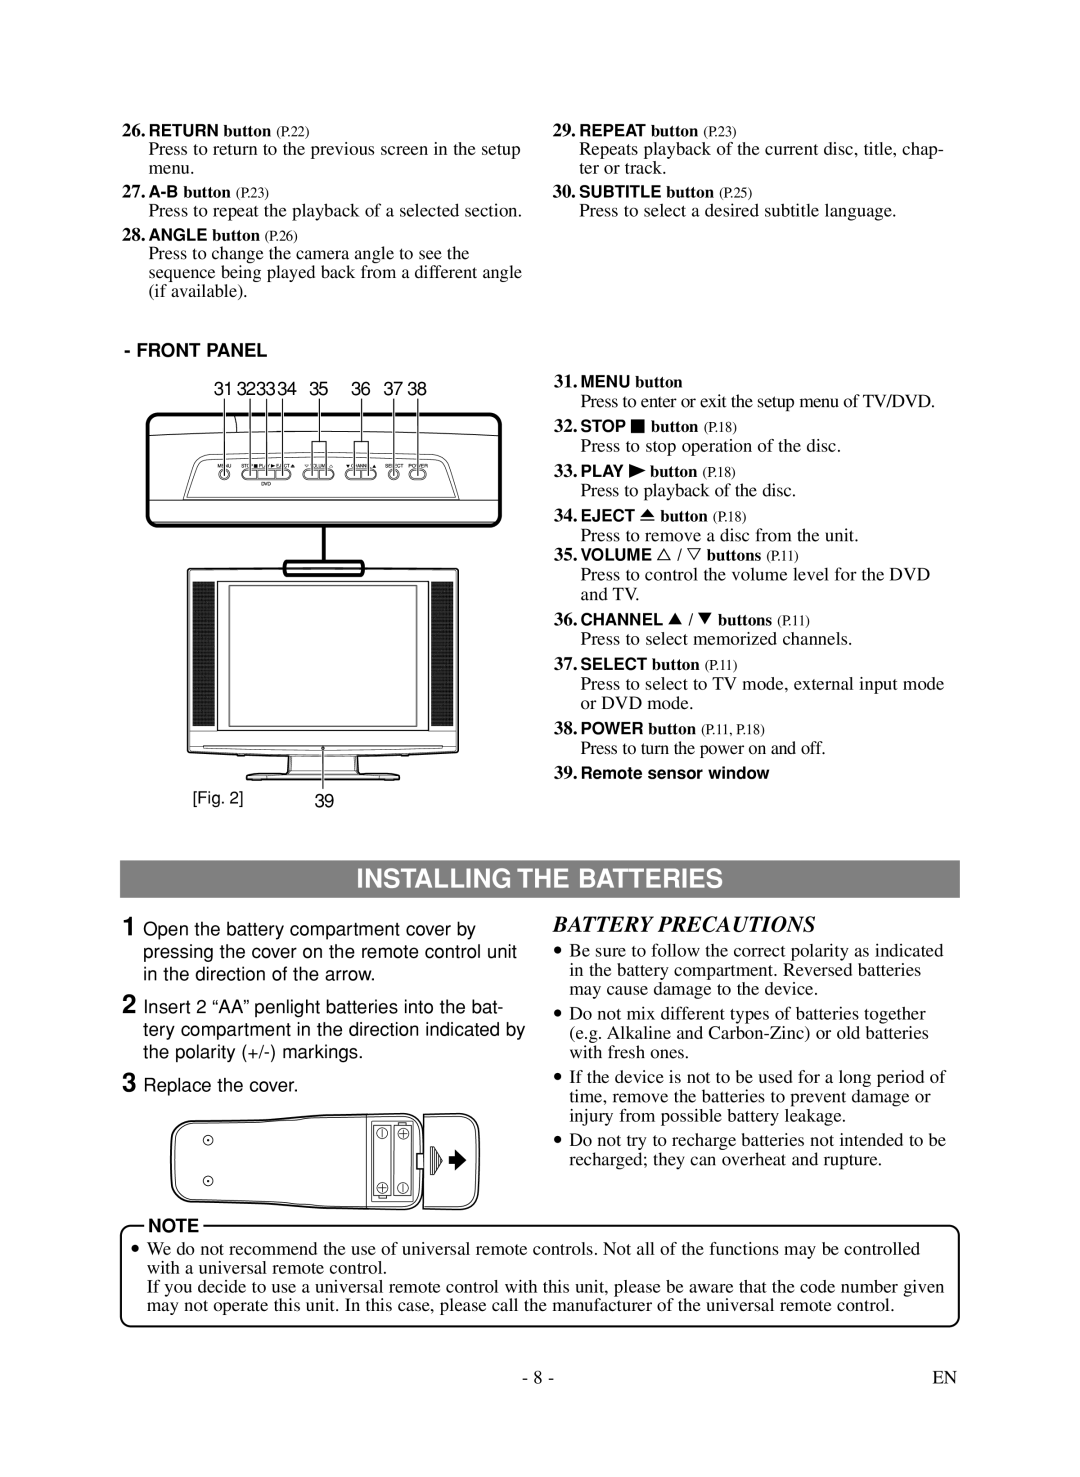 Symphonic LCD TV/DVD owner manual Installing The Batteries, Battery Precautions, Front Panel 